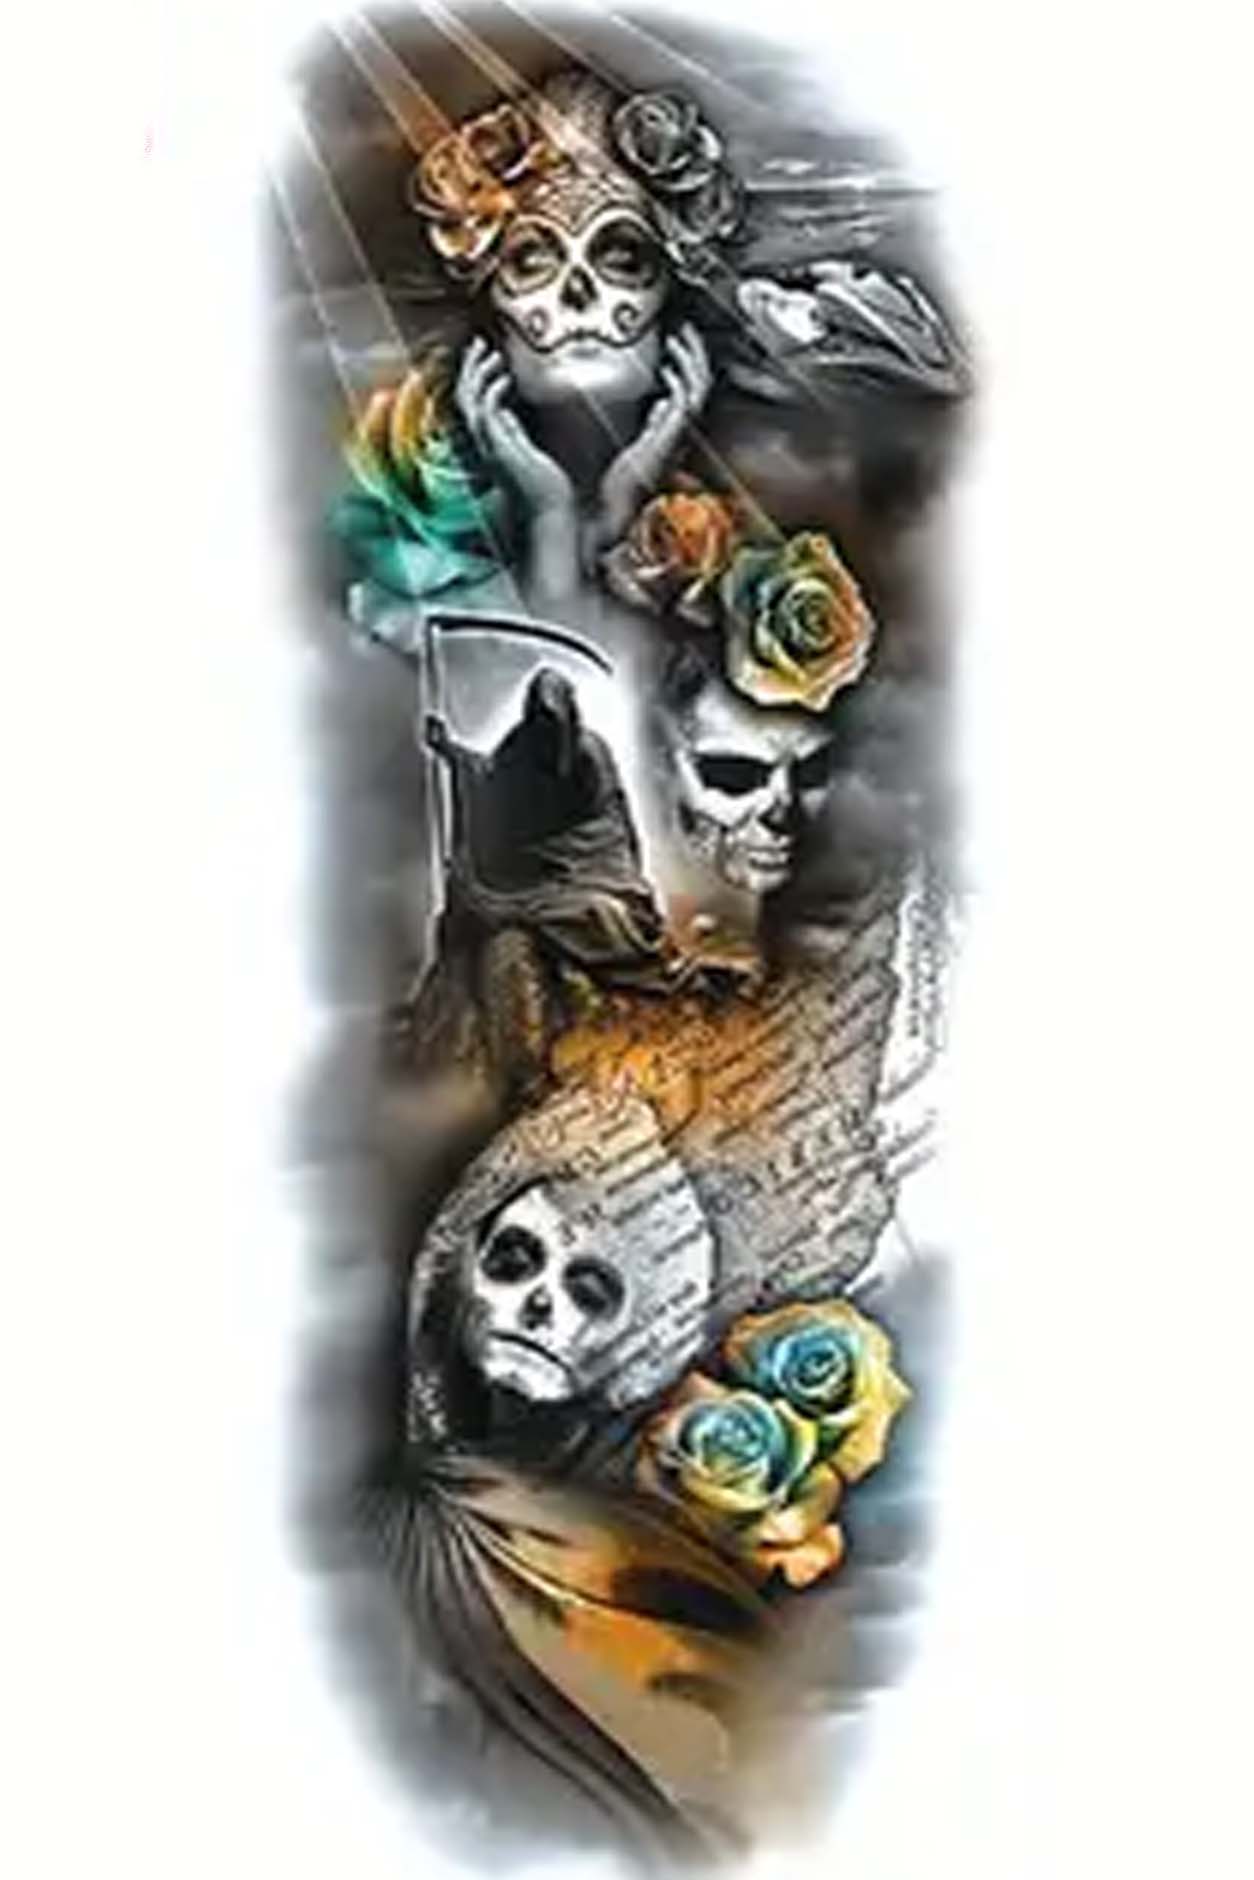 This Day of Dead-themed sleeve includes a beautiful woman in full Mardi Gras death mask, skull masks, a grim reaper with a sickle, and a Map of Mexico and Cancun. Grey and sunset-shaded clouds frame this work of art, with a Cancun coastal beach at the top. This tattoo artwork will cover an entire arm from shoulder to wrist.